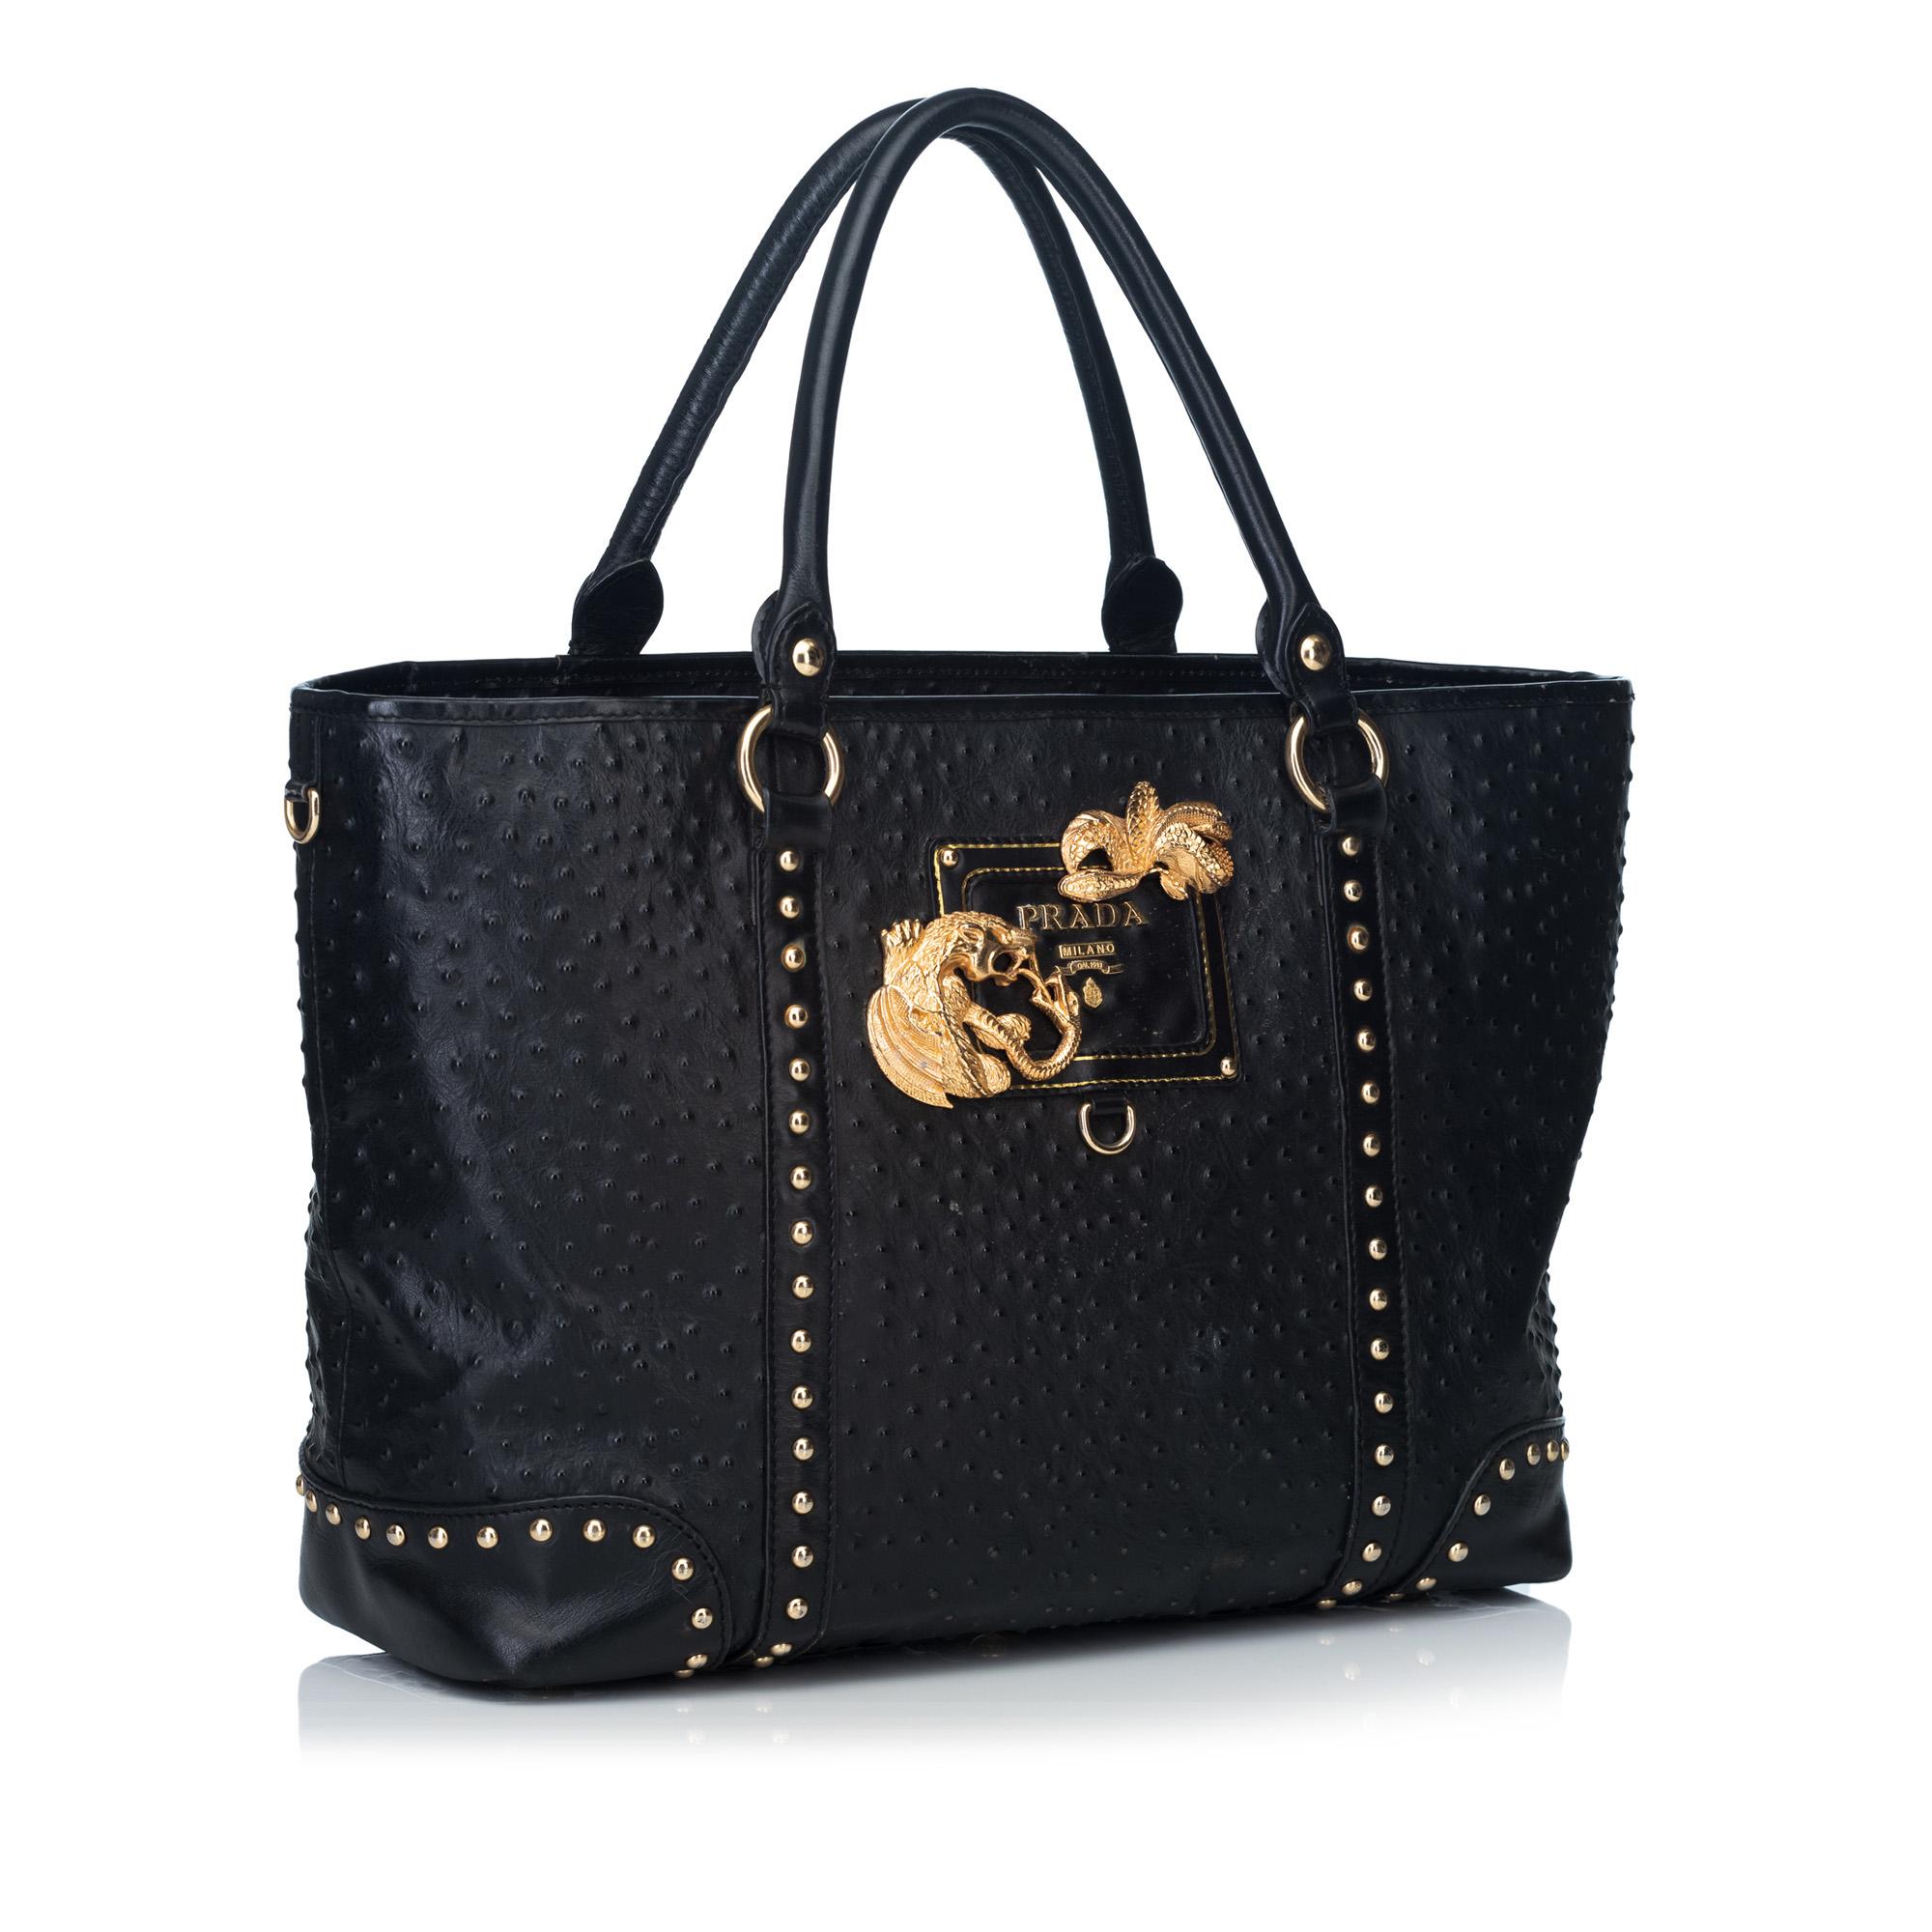 This tote features a textured leather body, rolled leather handles, top zip closure, interior slip pockets, and an interior zip pocket. It carries as AB condition rating.

Inclusions: 
This item does not come with inclusions.

Dimensions:
Length: